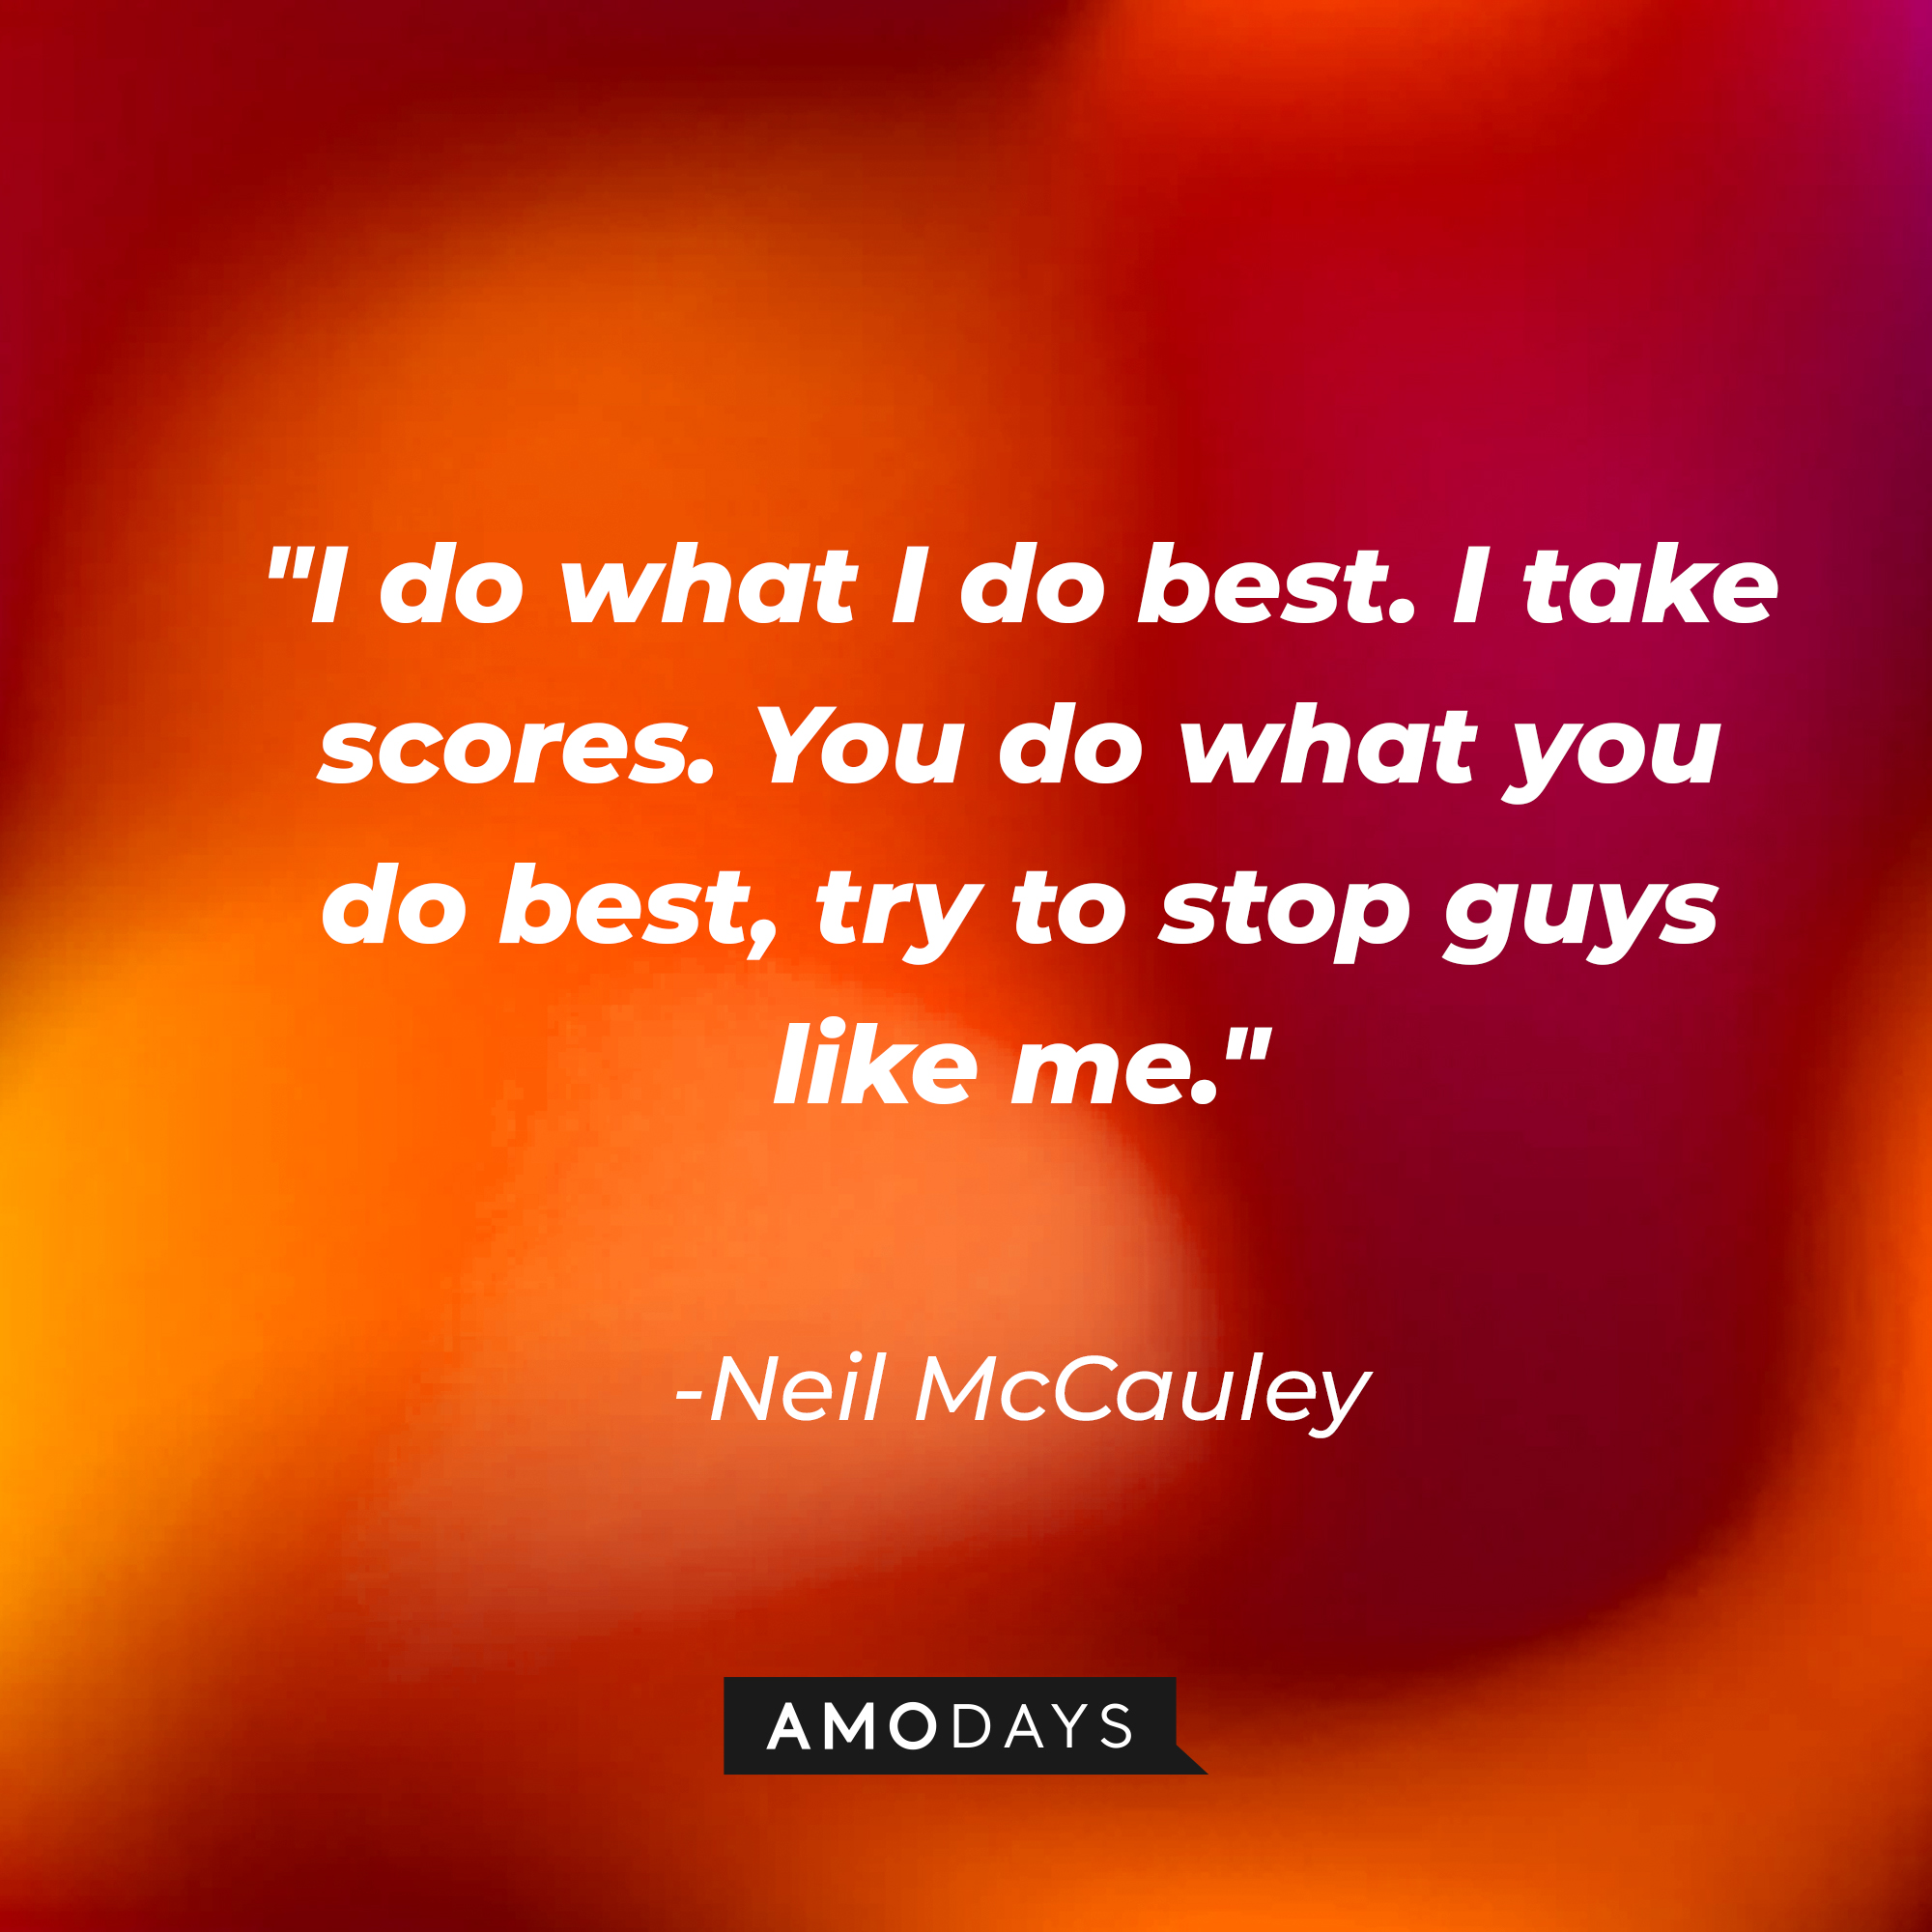 Neil McCauley's quote: "I do what I do best. I take scores. You do what you do best, try to stop guys like me." | Source: AmoDays